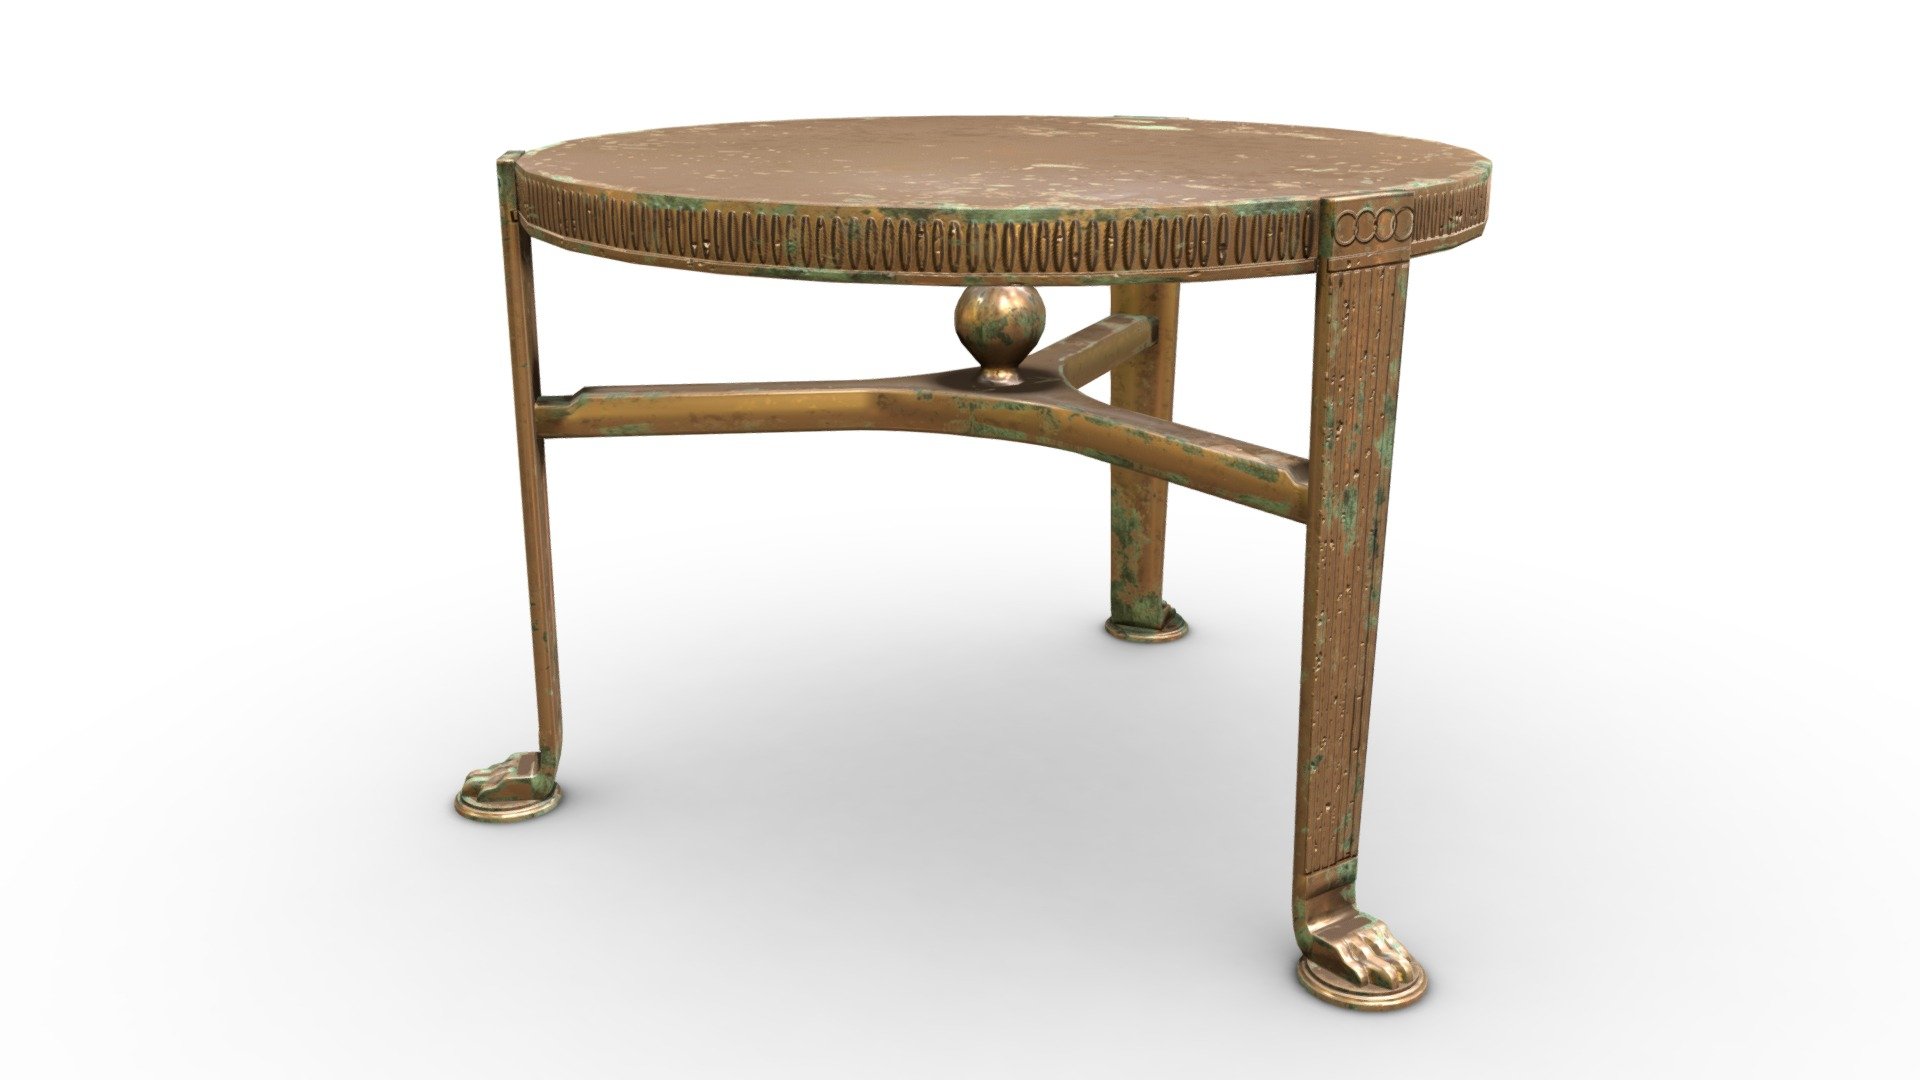 Roman tables, or Mensa, were used to hold lamps or ornaments. The three legged version is called delphica. This one is made from brass and corroded a great deal. The original design uses the lion feet form for the legs 3d model